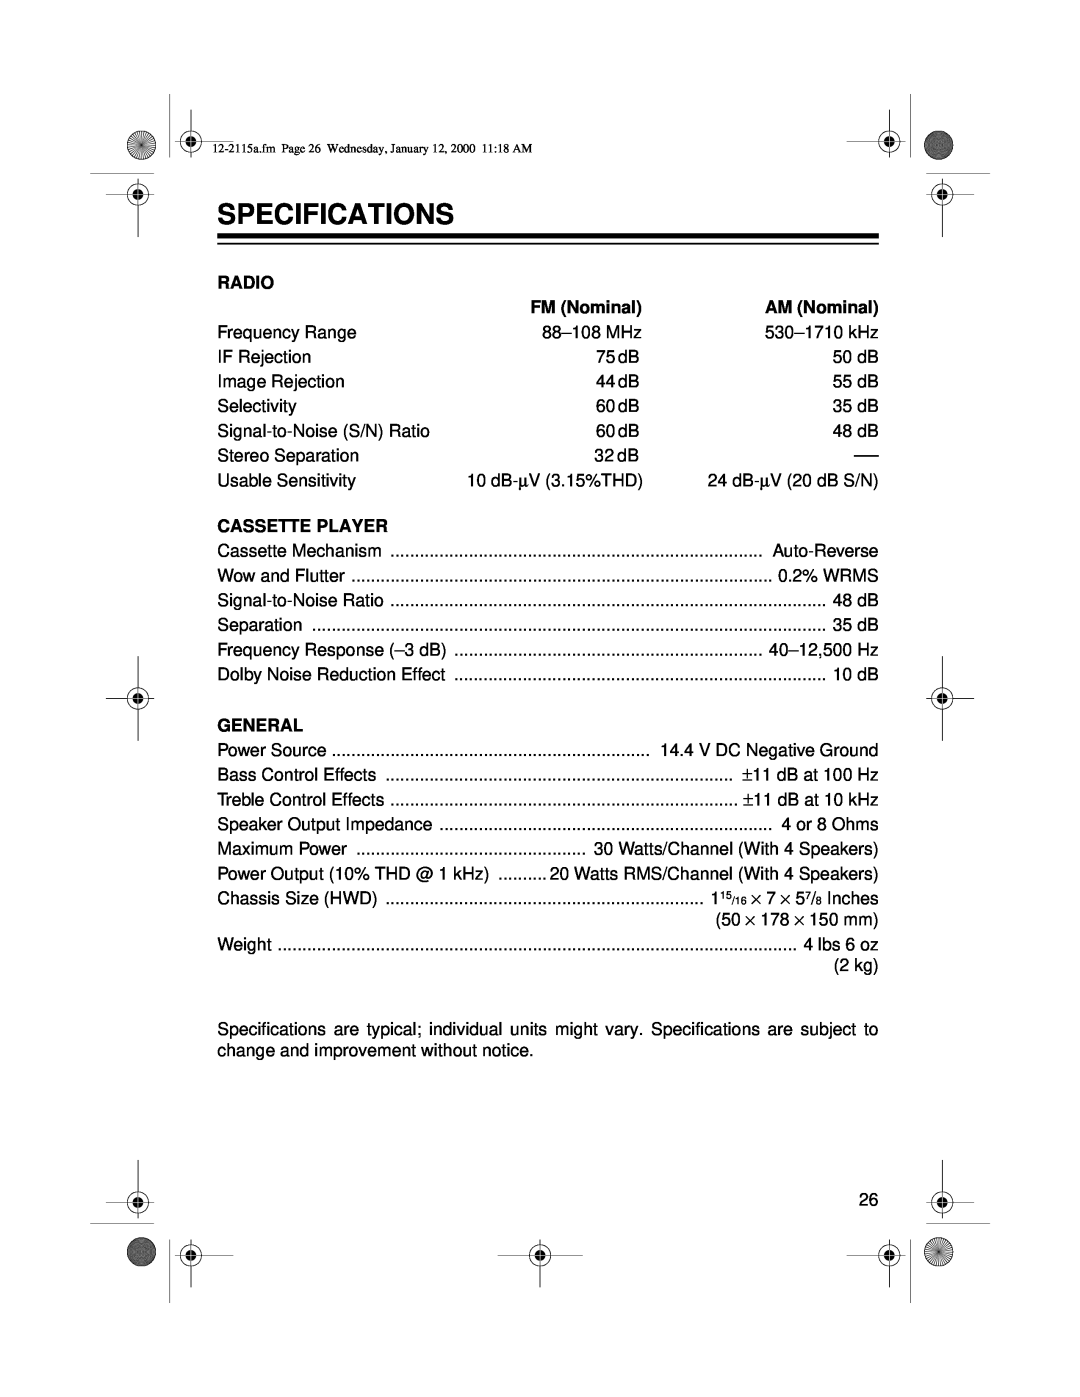 Radio Shack AM/FM Stereo Cassette owner manual Specifications 